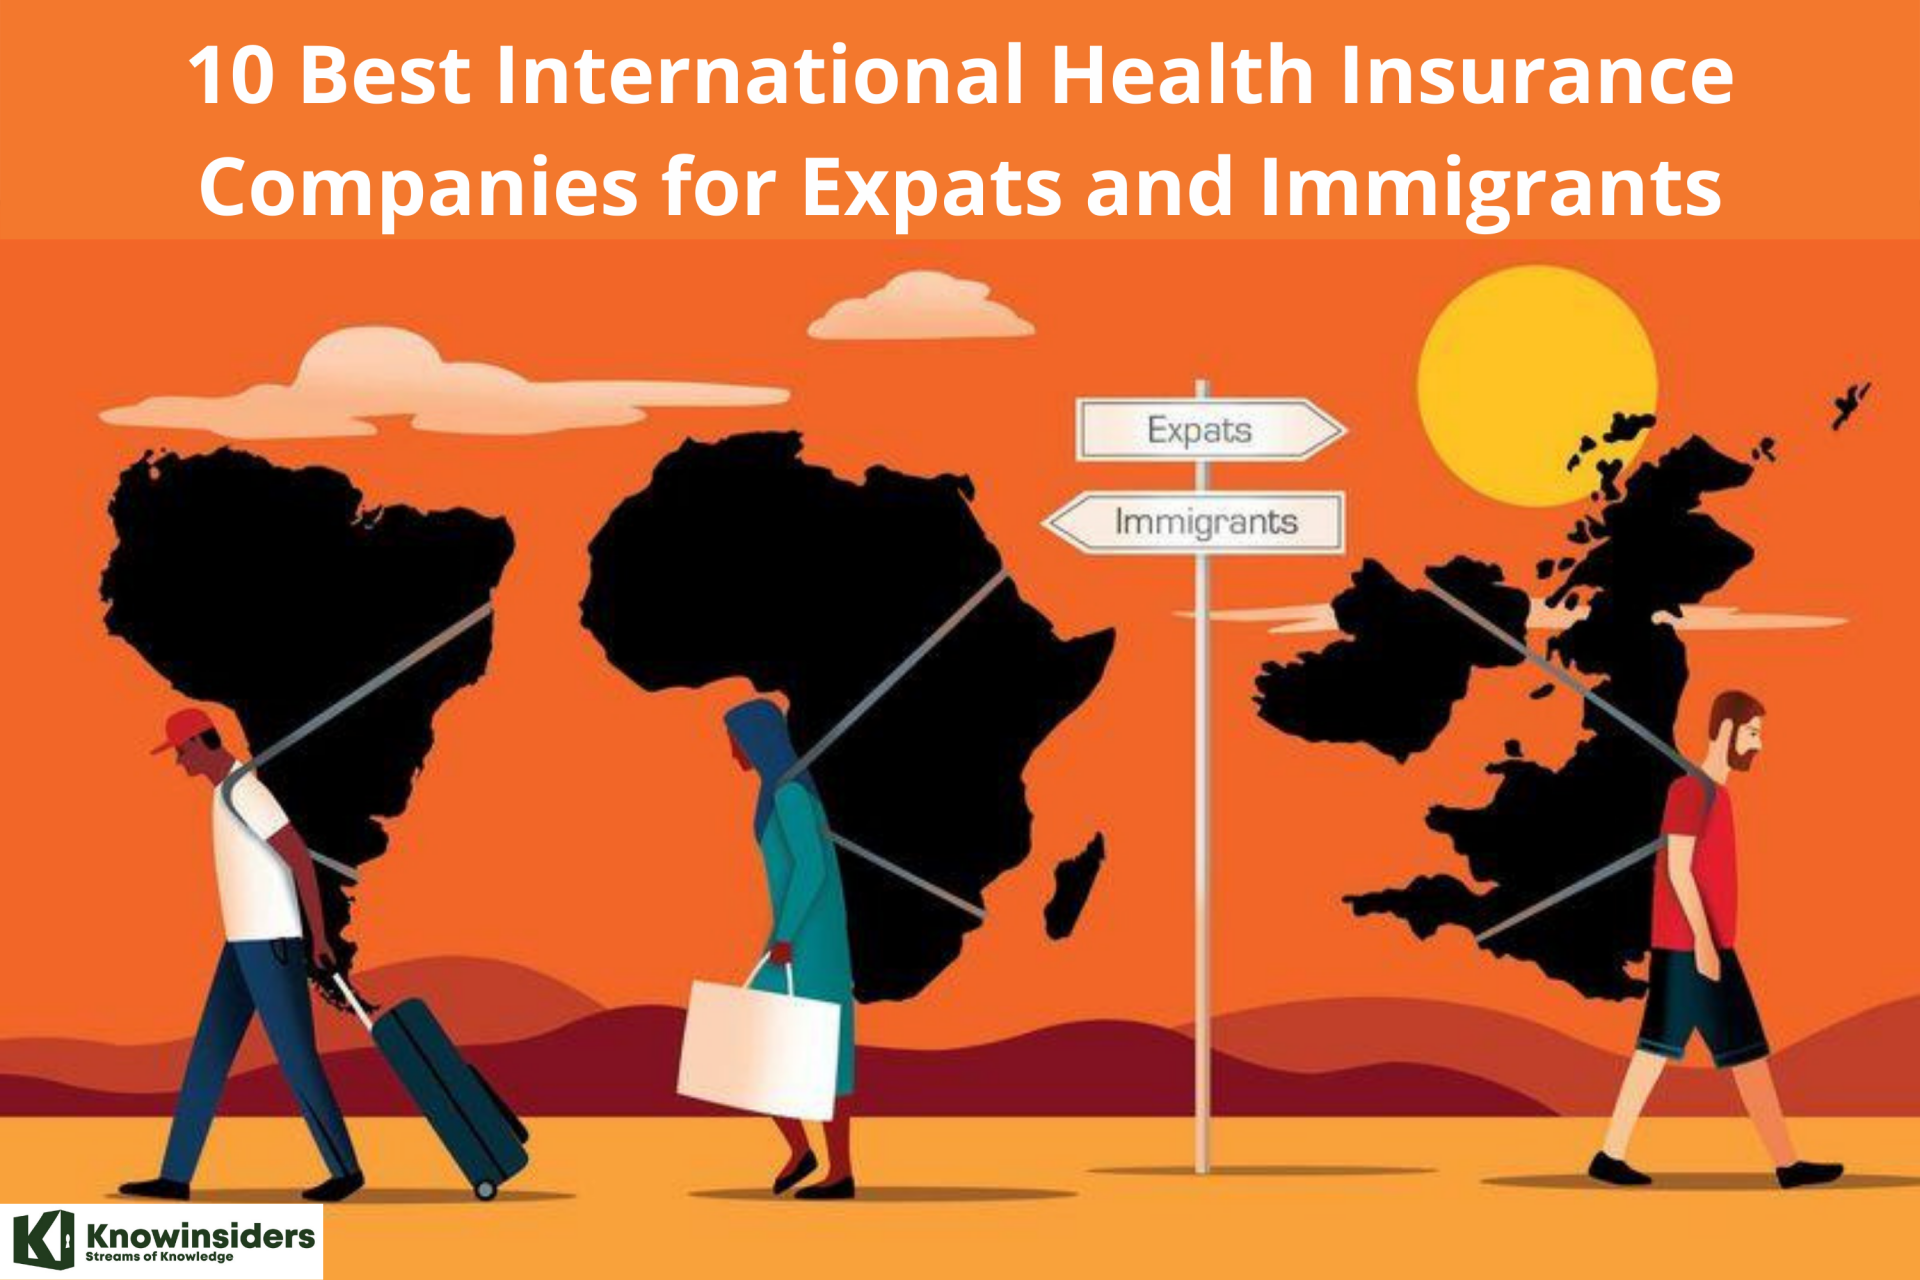 10 Largest & Best International Health Insurance Companies for Expats and Immigrants